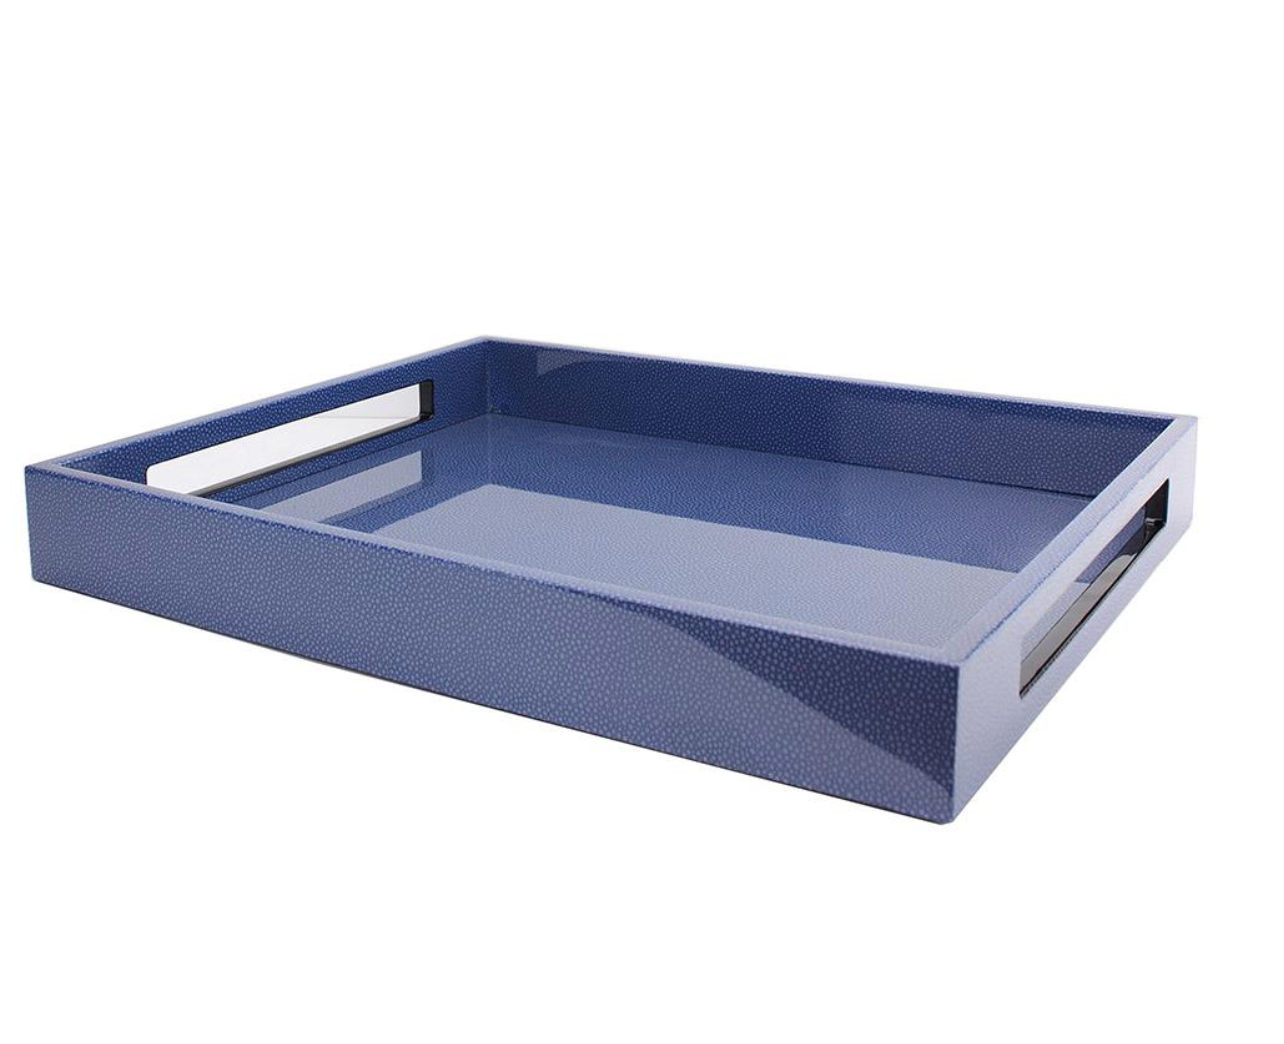 Lacquered wood large serving tray